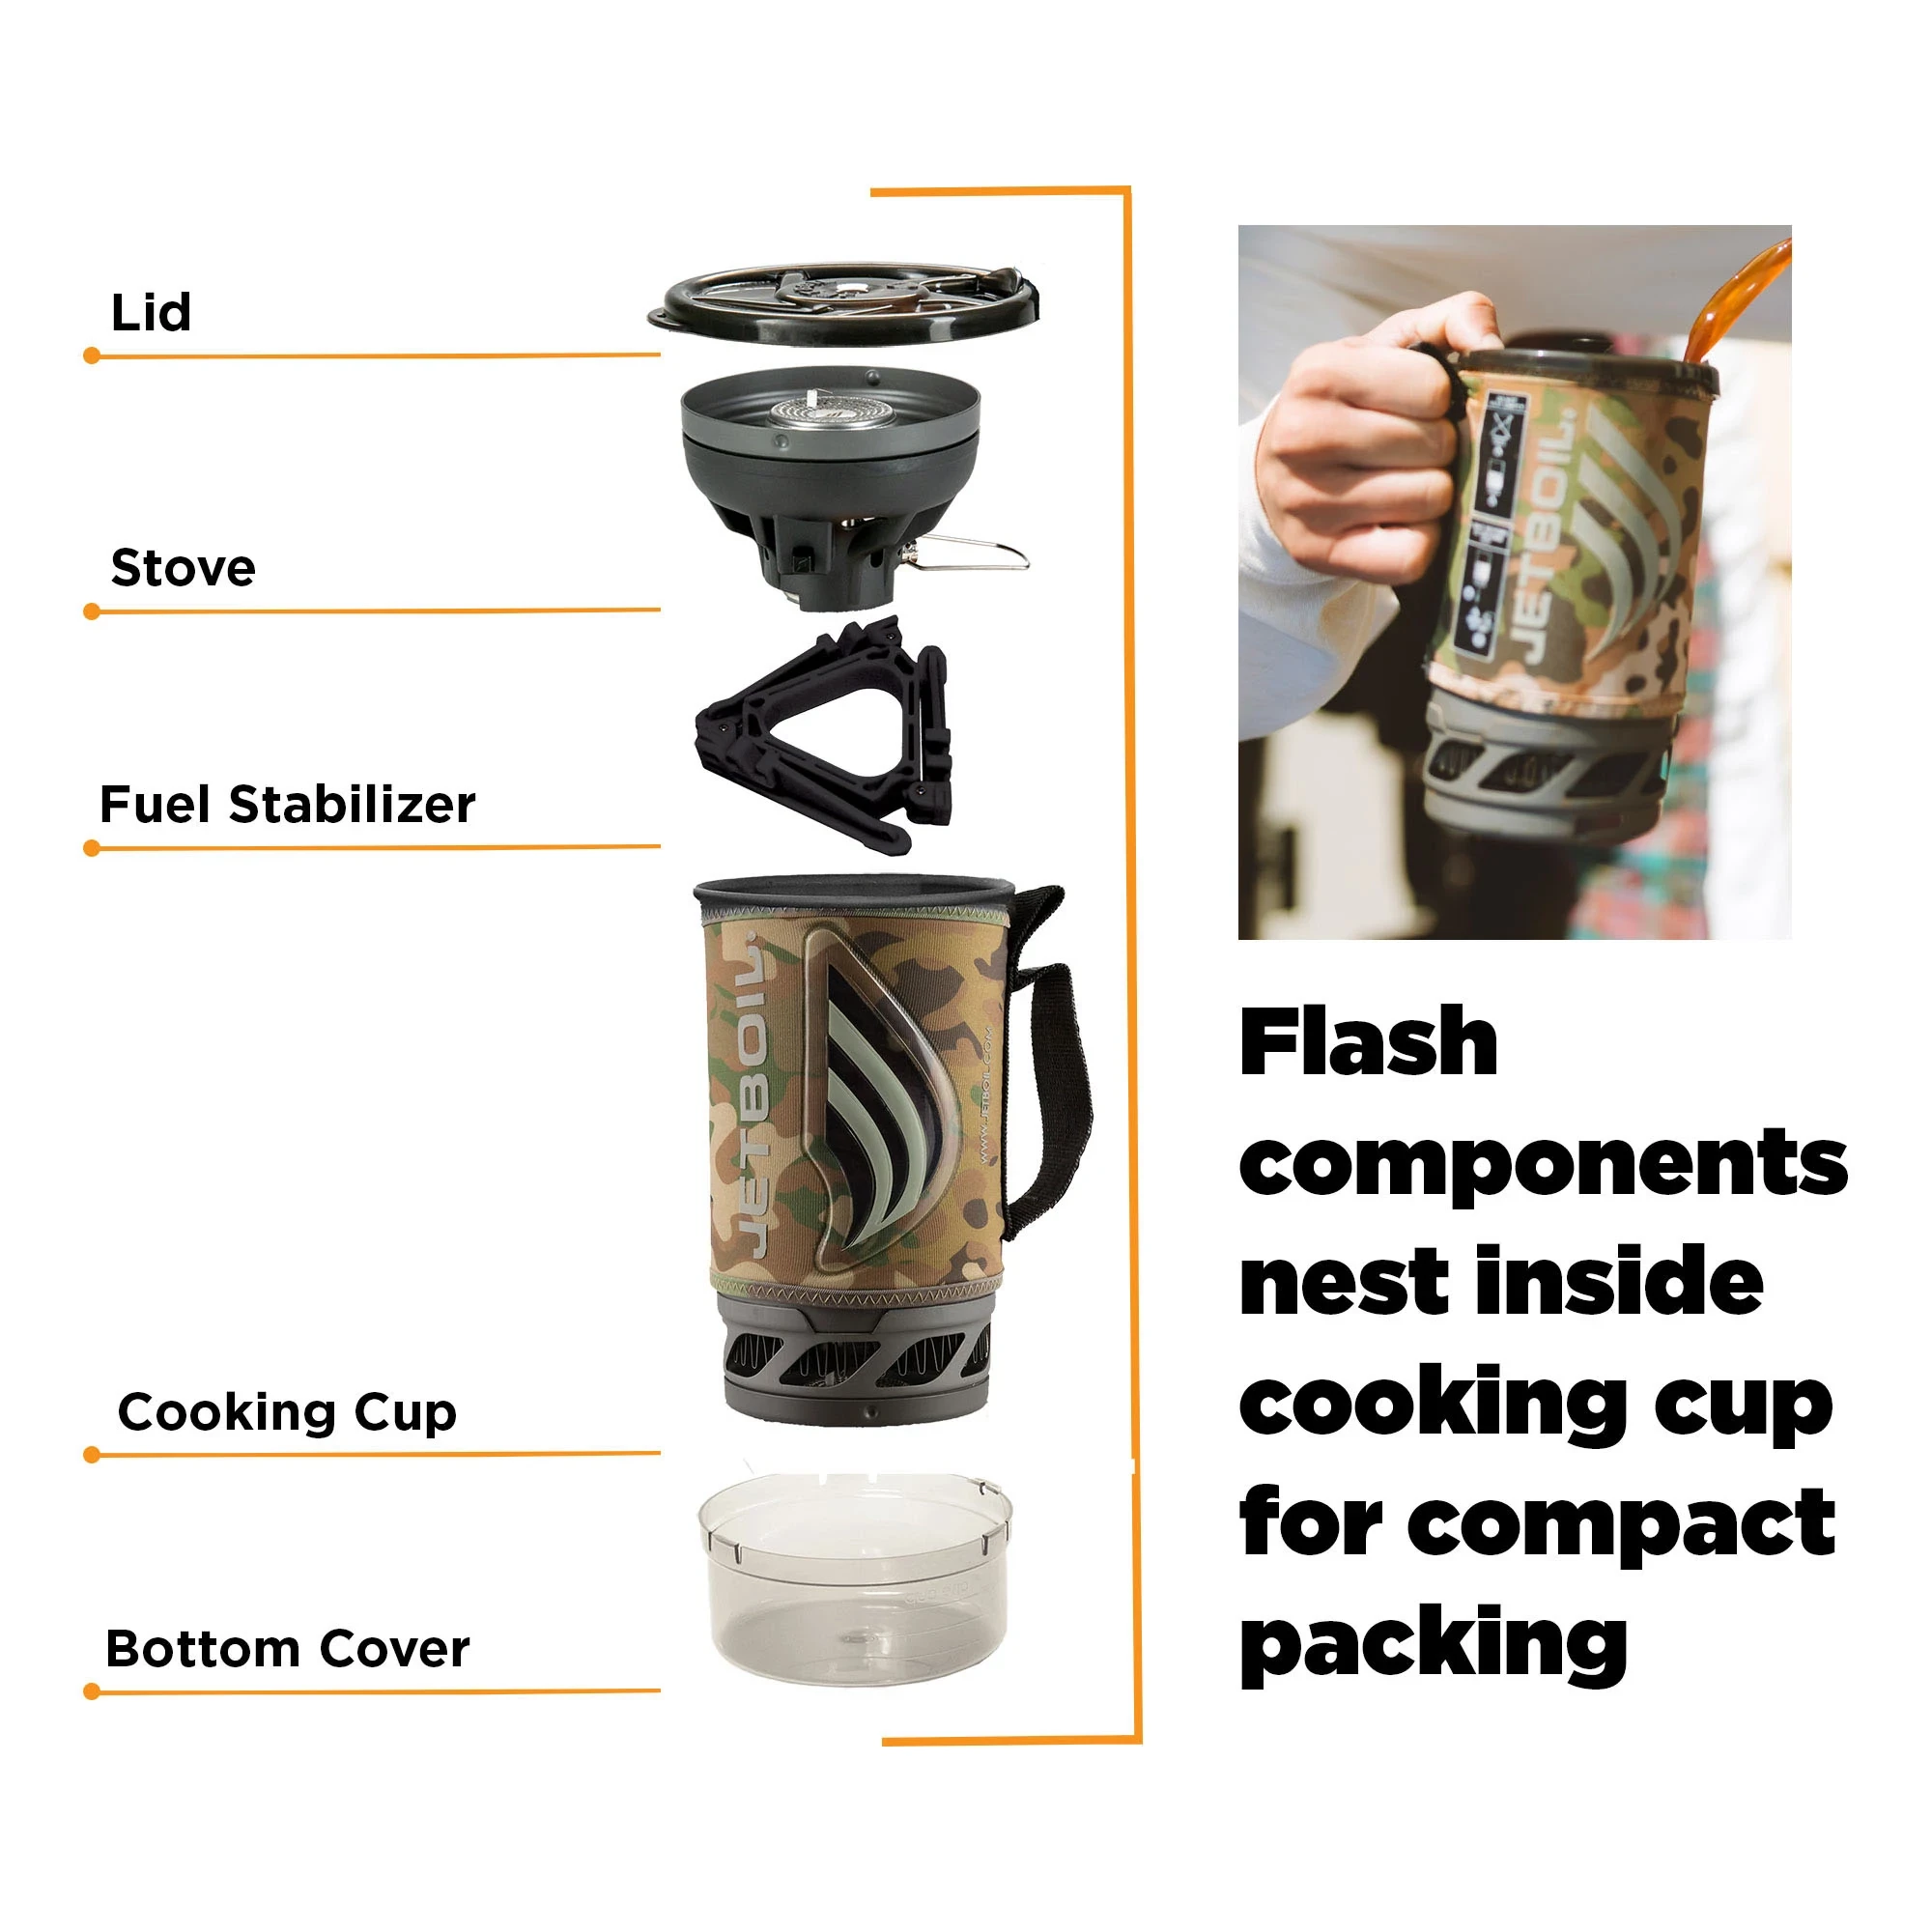 Flash Packability Infographic